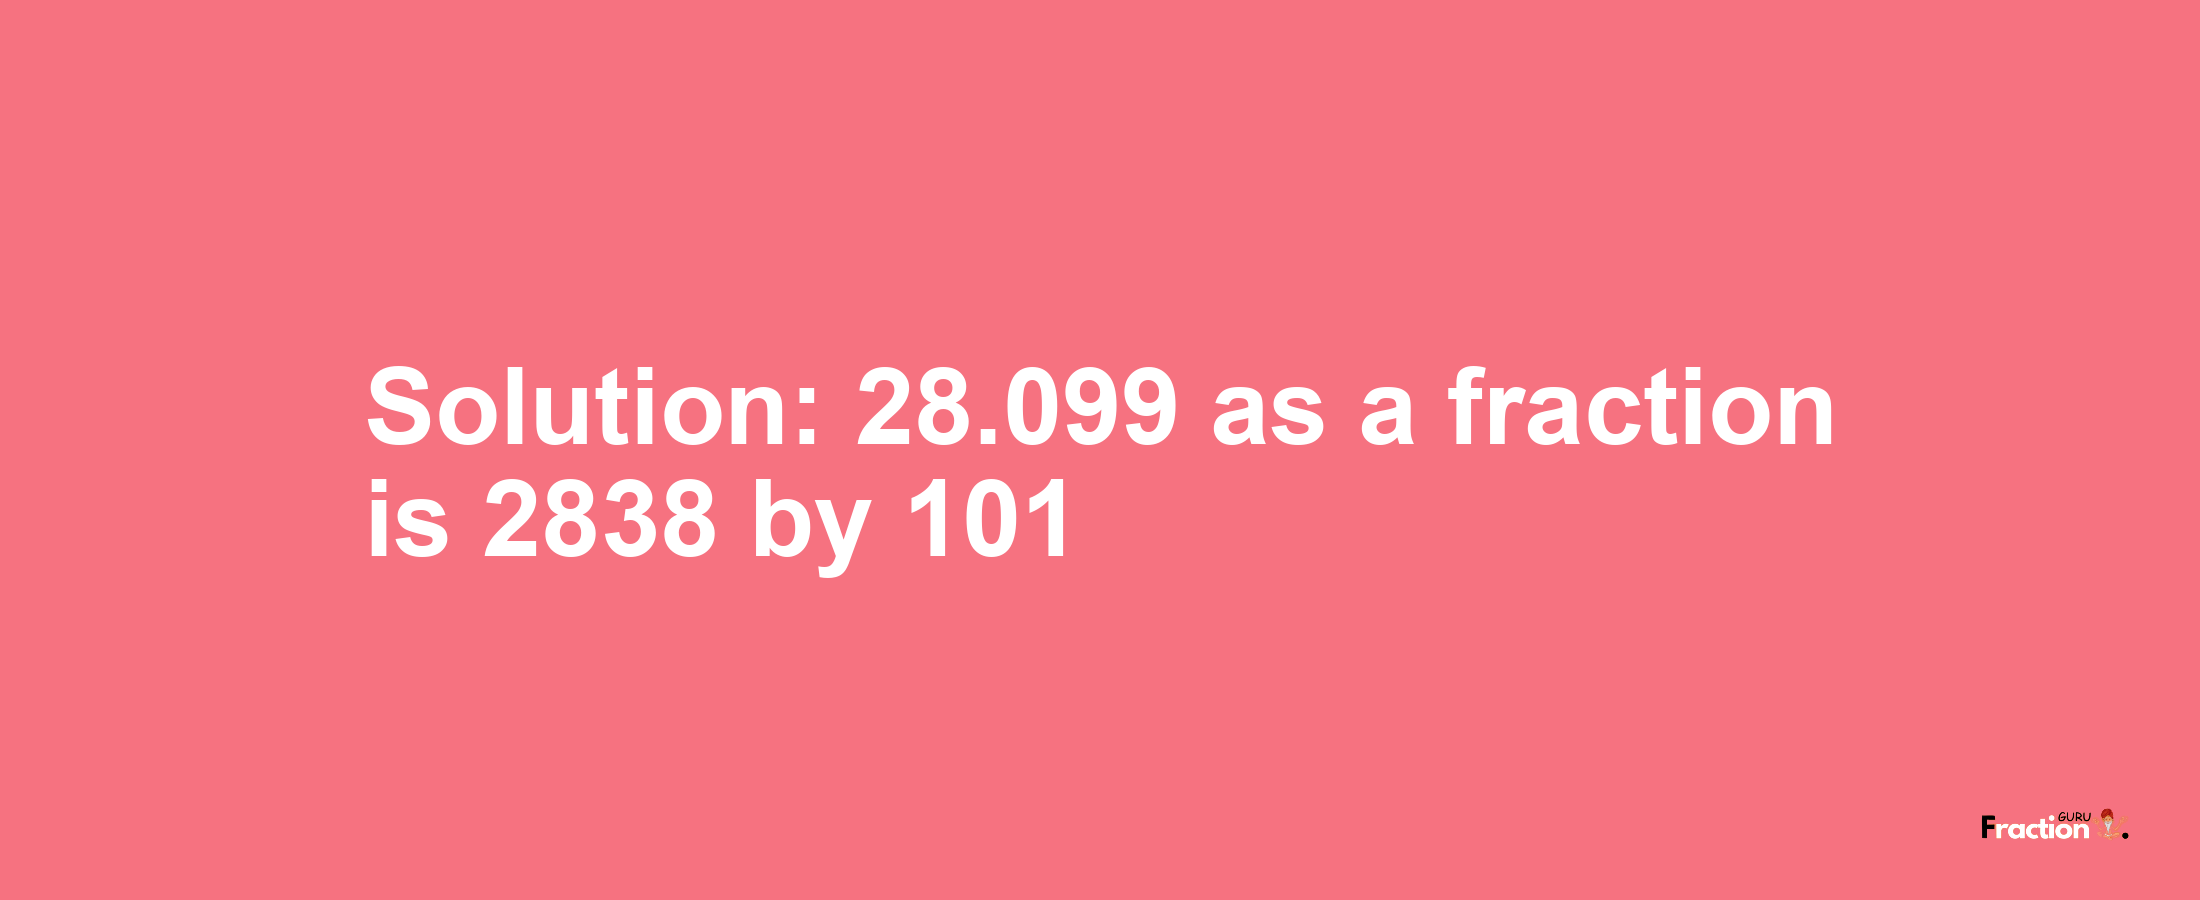 Solution:28.099 as a fraction is 2838/101